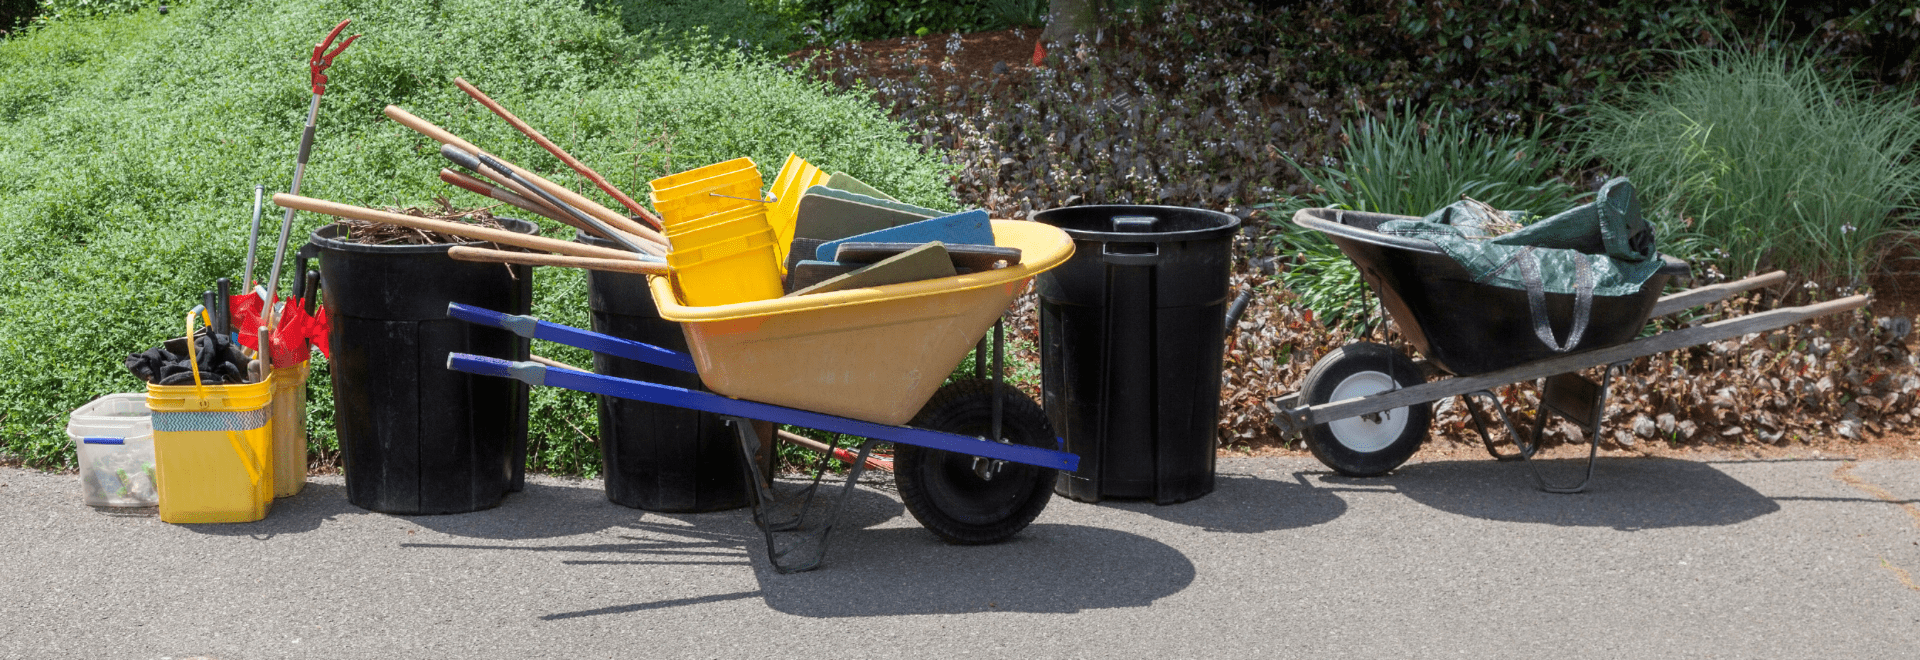 Landscaping tools and equipment in wheelbarrows and bins, from Boise Landscaping Company